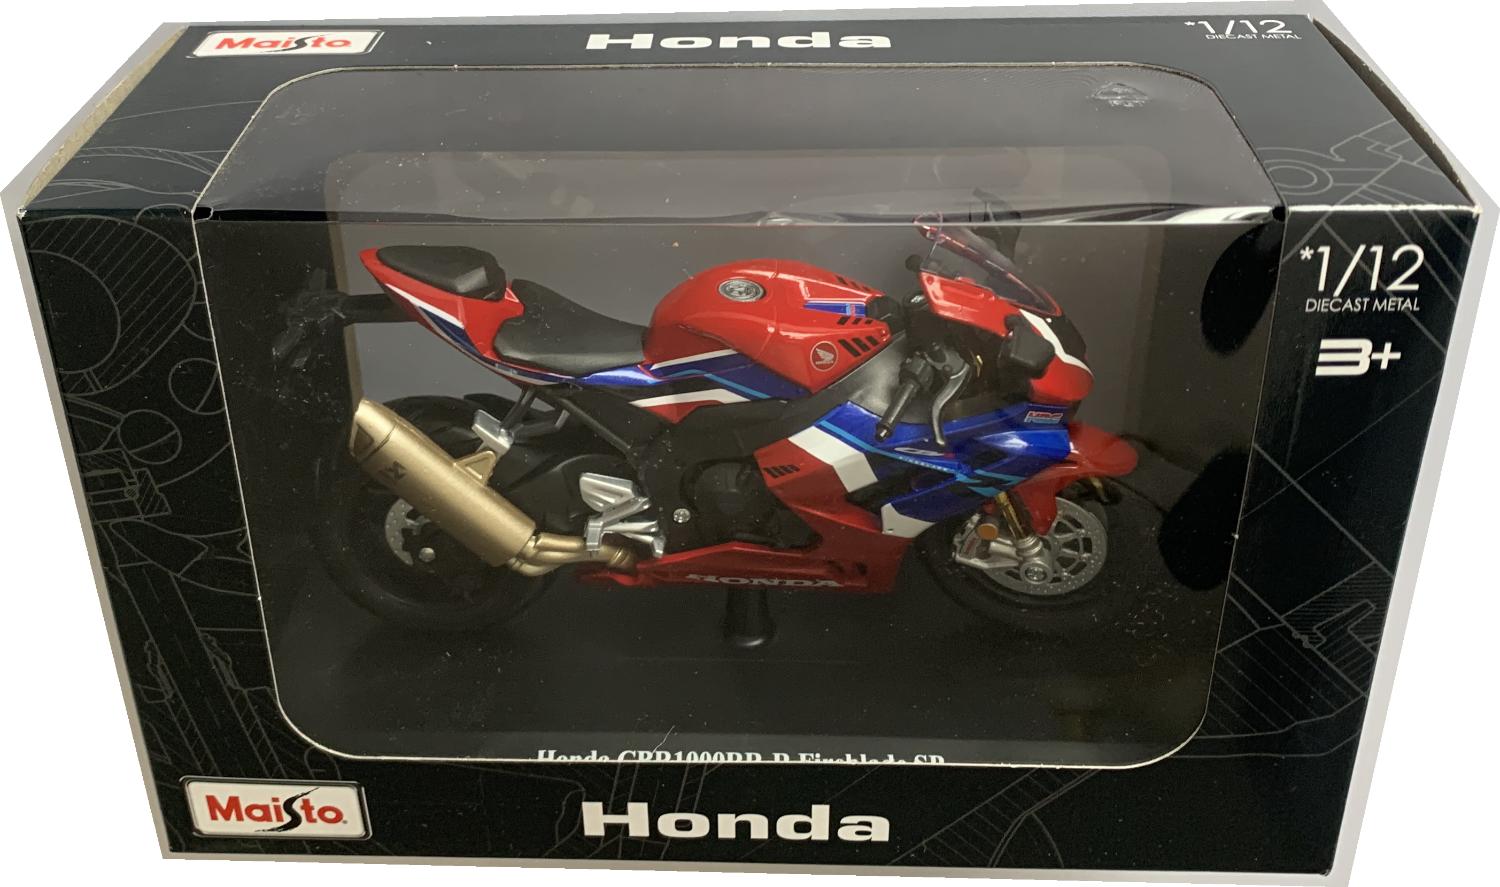 Features include rubber rolling wheels and working kick stand.  Model is mounted on a removable plinth and is presented in a window display box